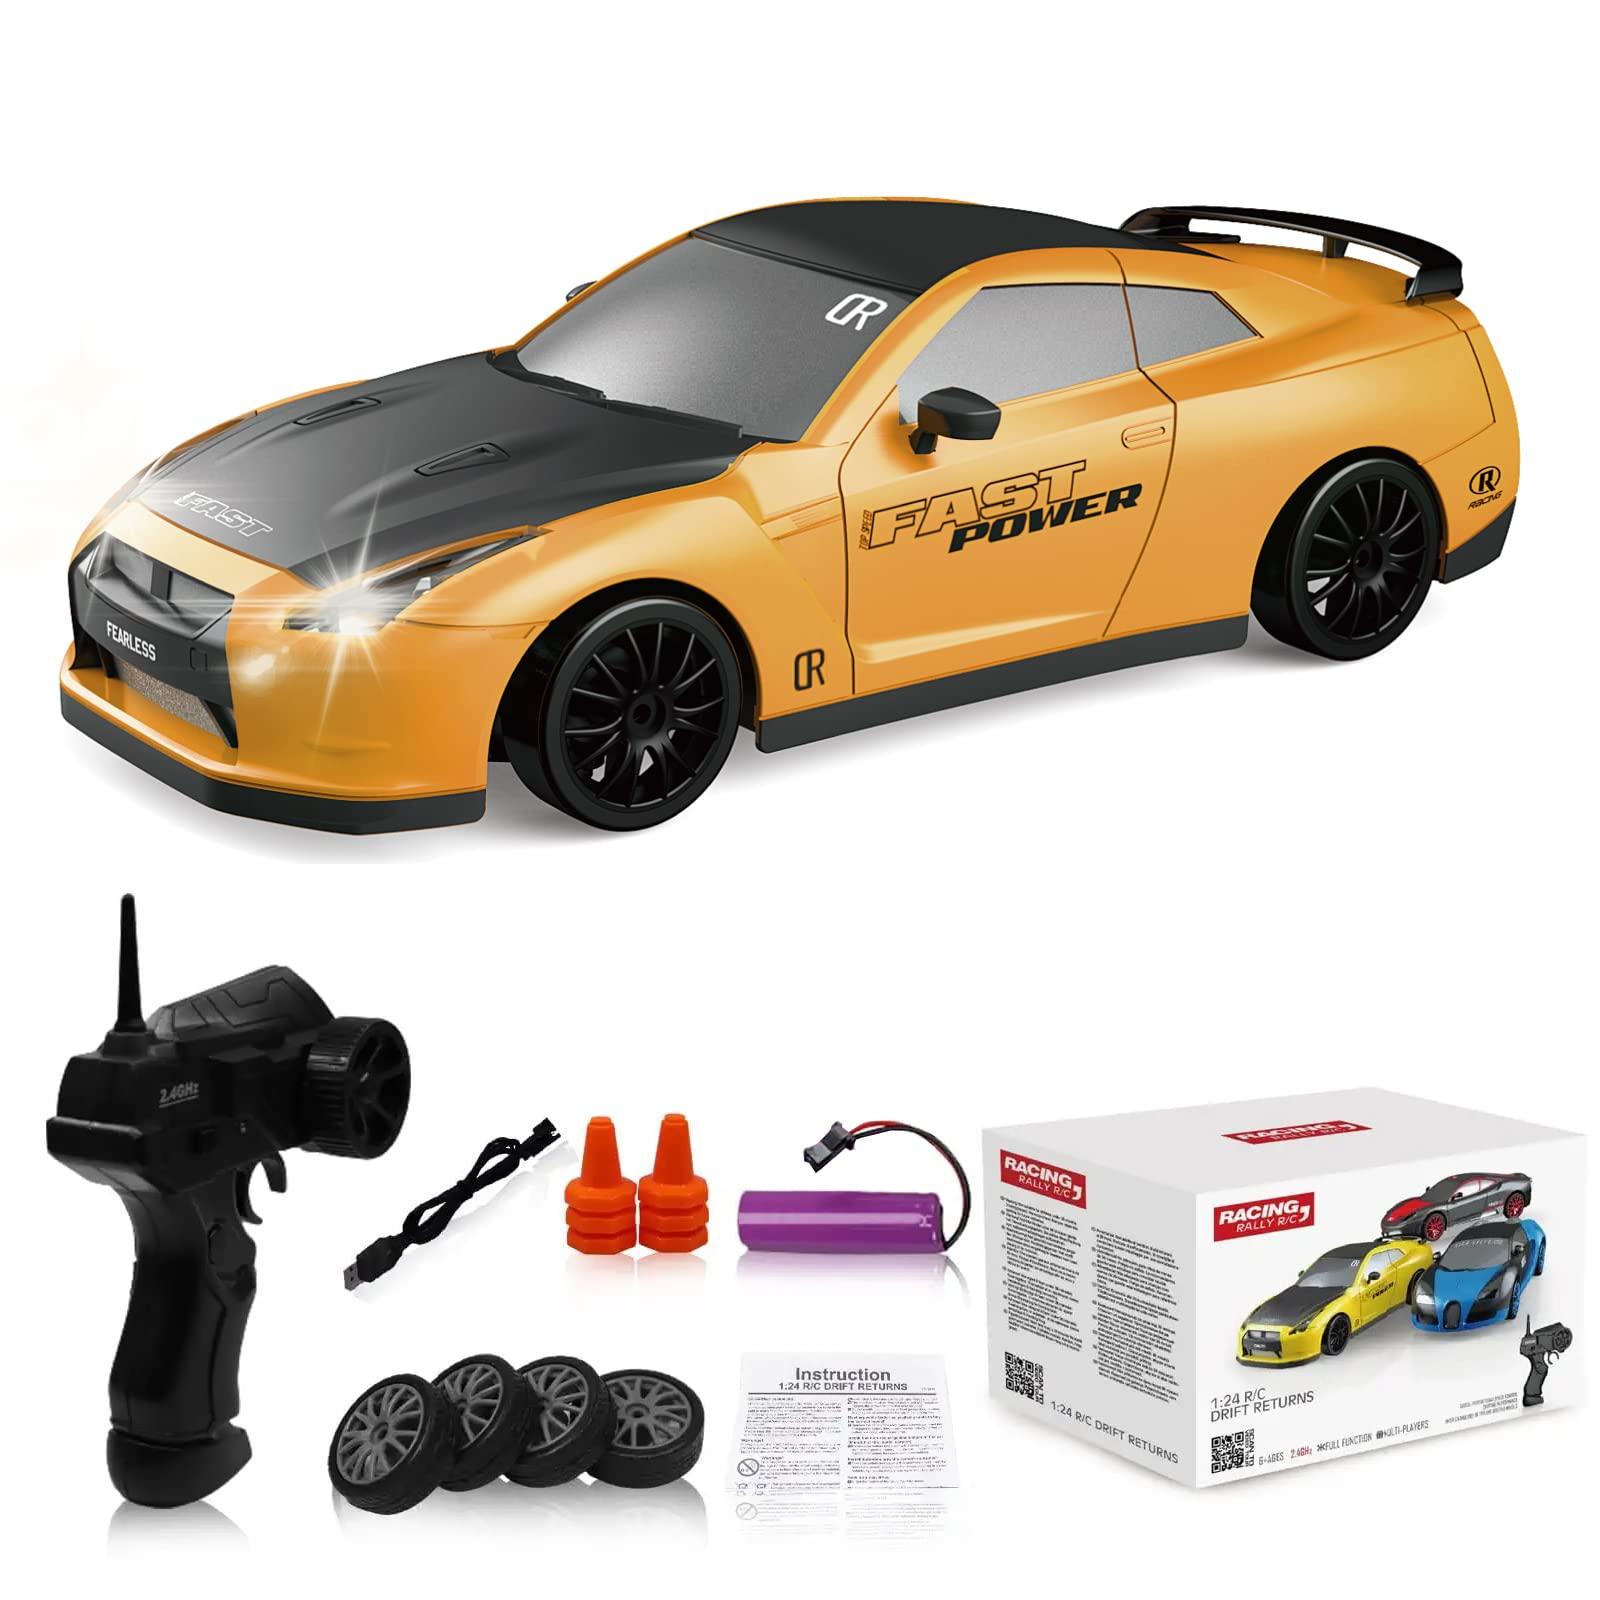 Small Rc Drift Car: Key Features and Components